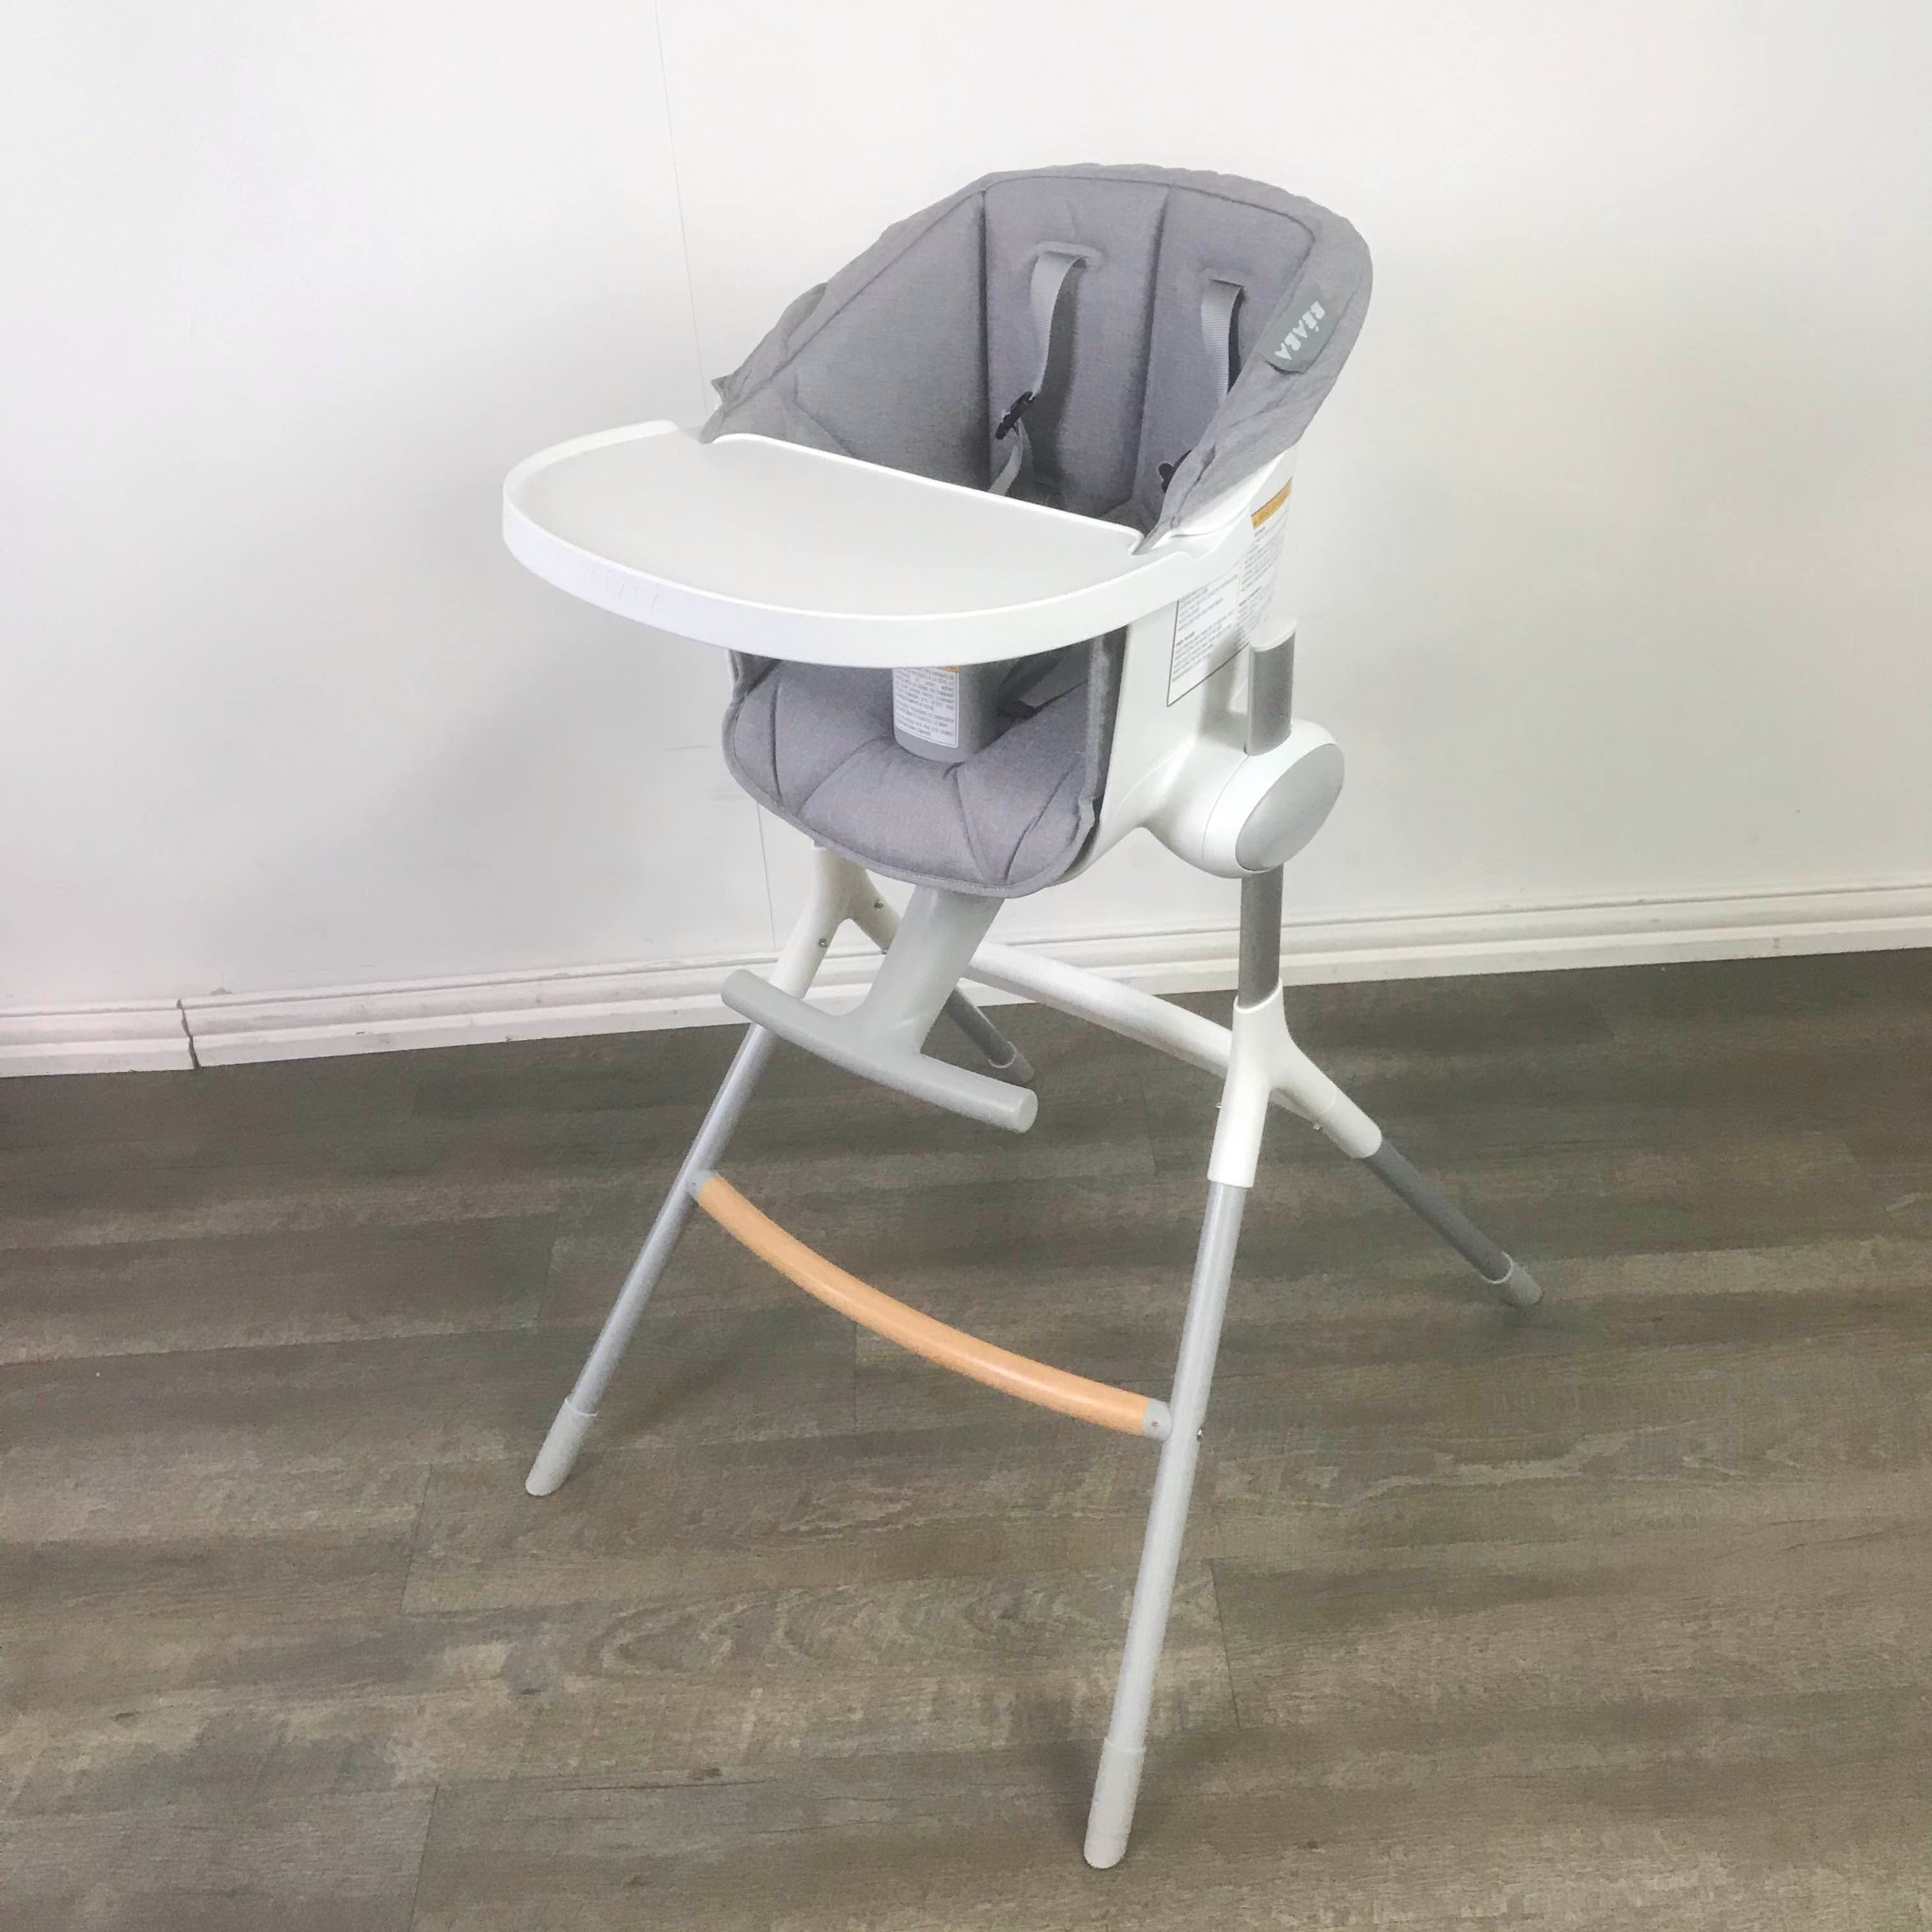 BEABA Adjustable High Chair, Height Adjustable Baby High Chair with Six  Height Settings, from Kitchen Table to Island or Counter, Removable Tray  and